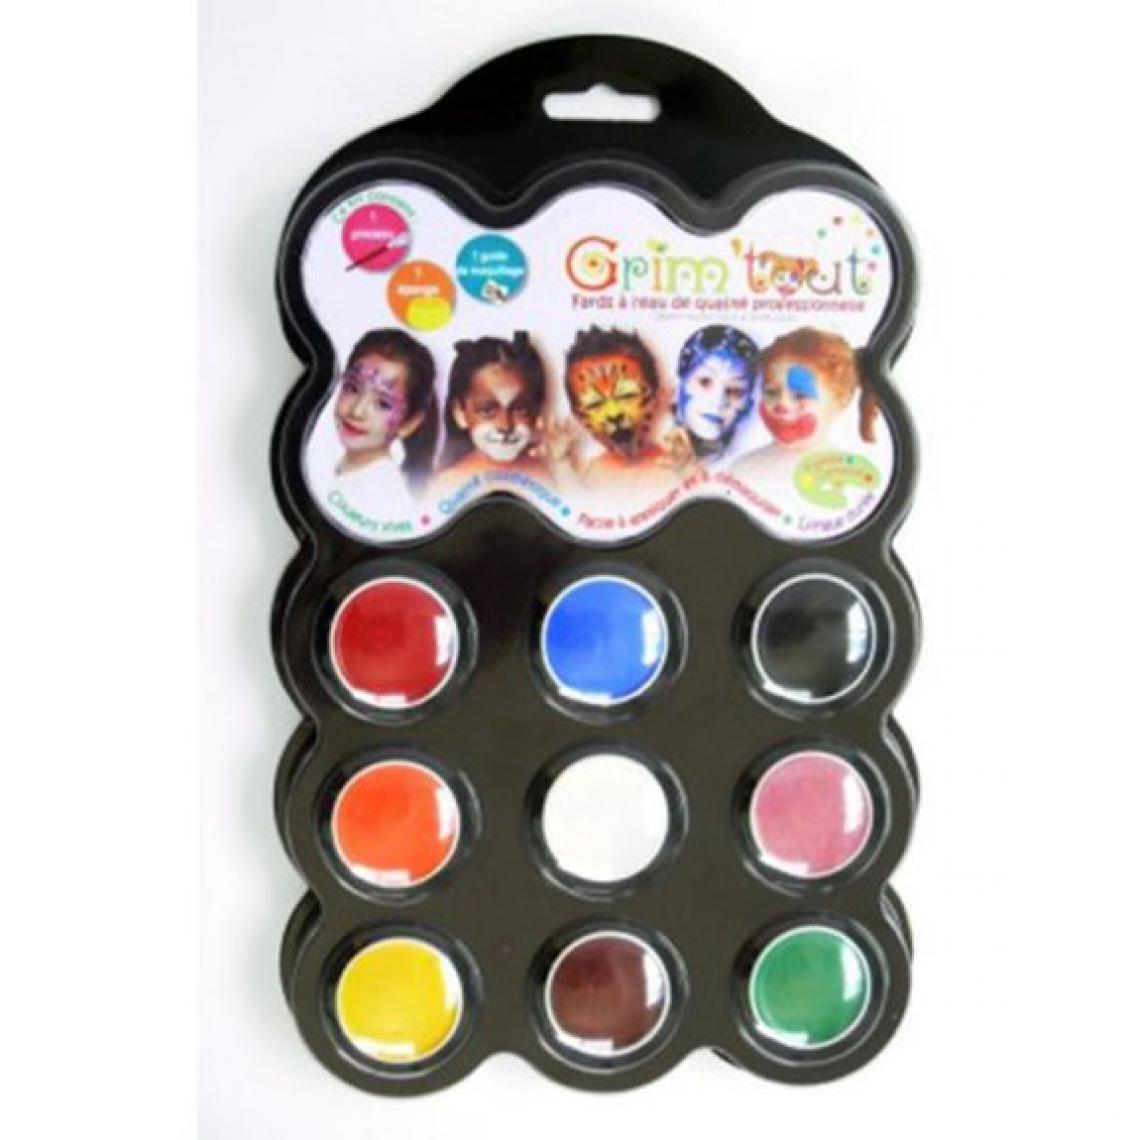 Ludendo - Maquillage Palette 9 couleurs : Carnaval - Maquillage et coiffure